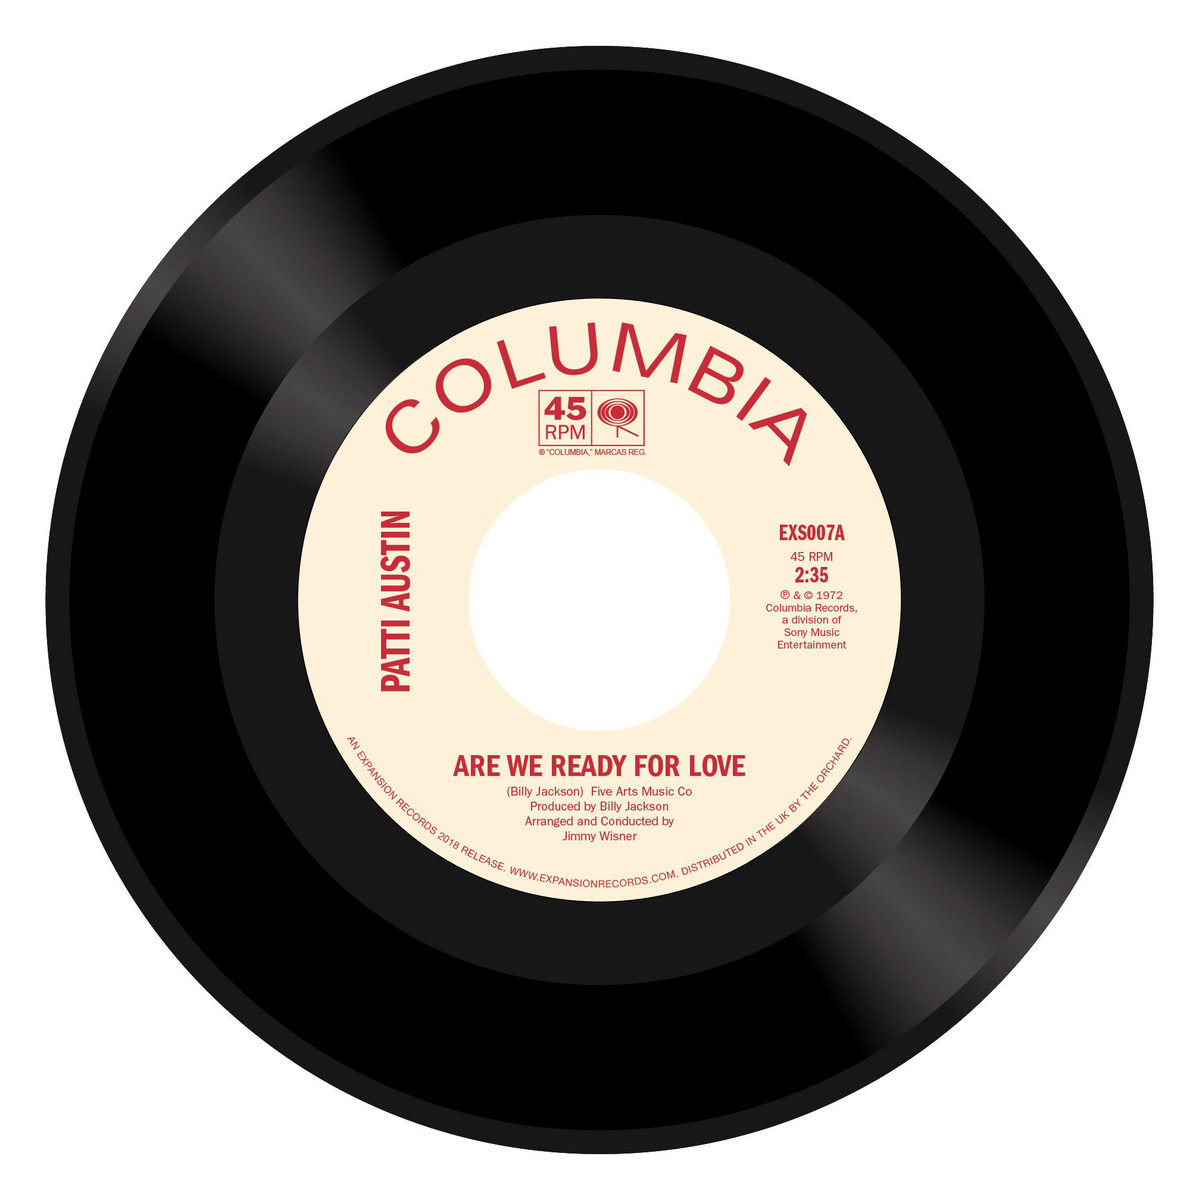 PATTI AUSTIN / パティ・オースティン / ARE WE READY FOR LOVE / DIDN'T SAY A WORD (7")